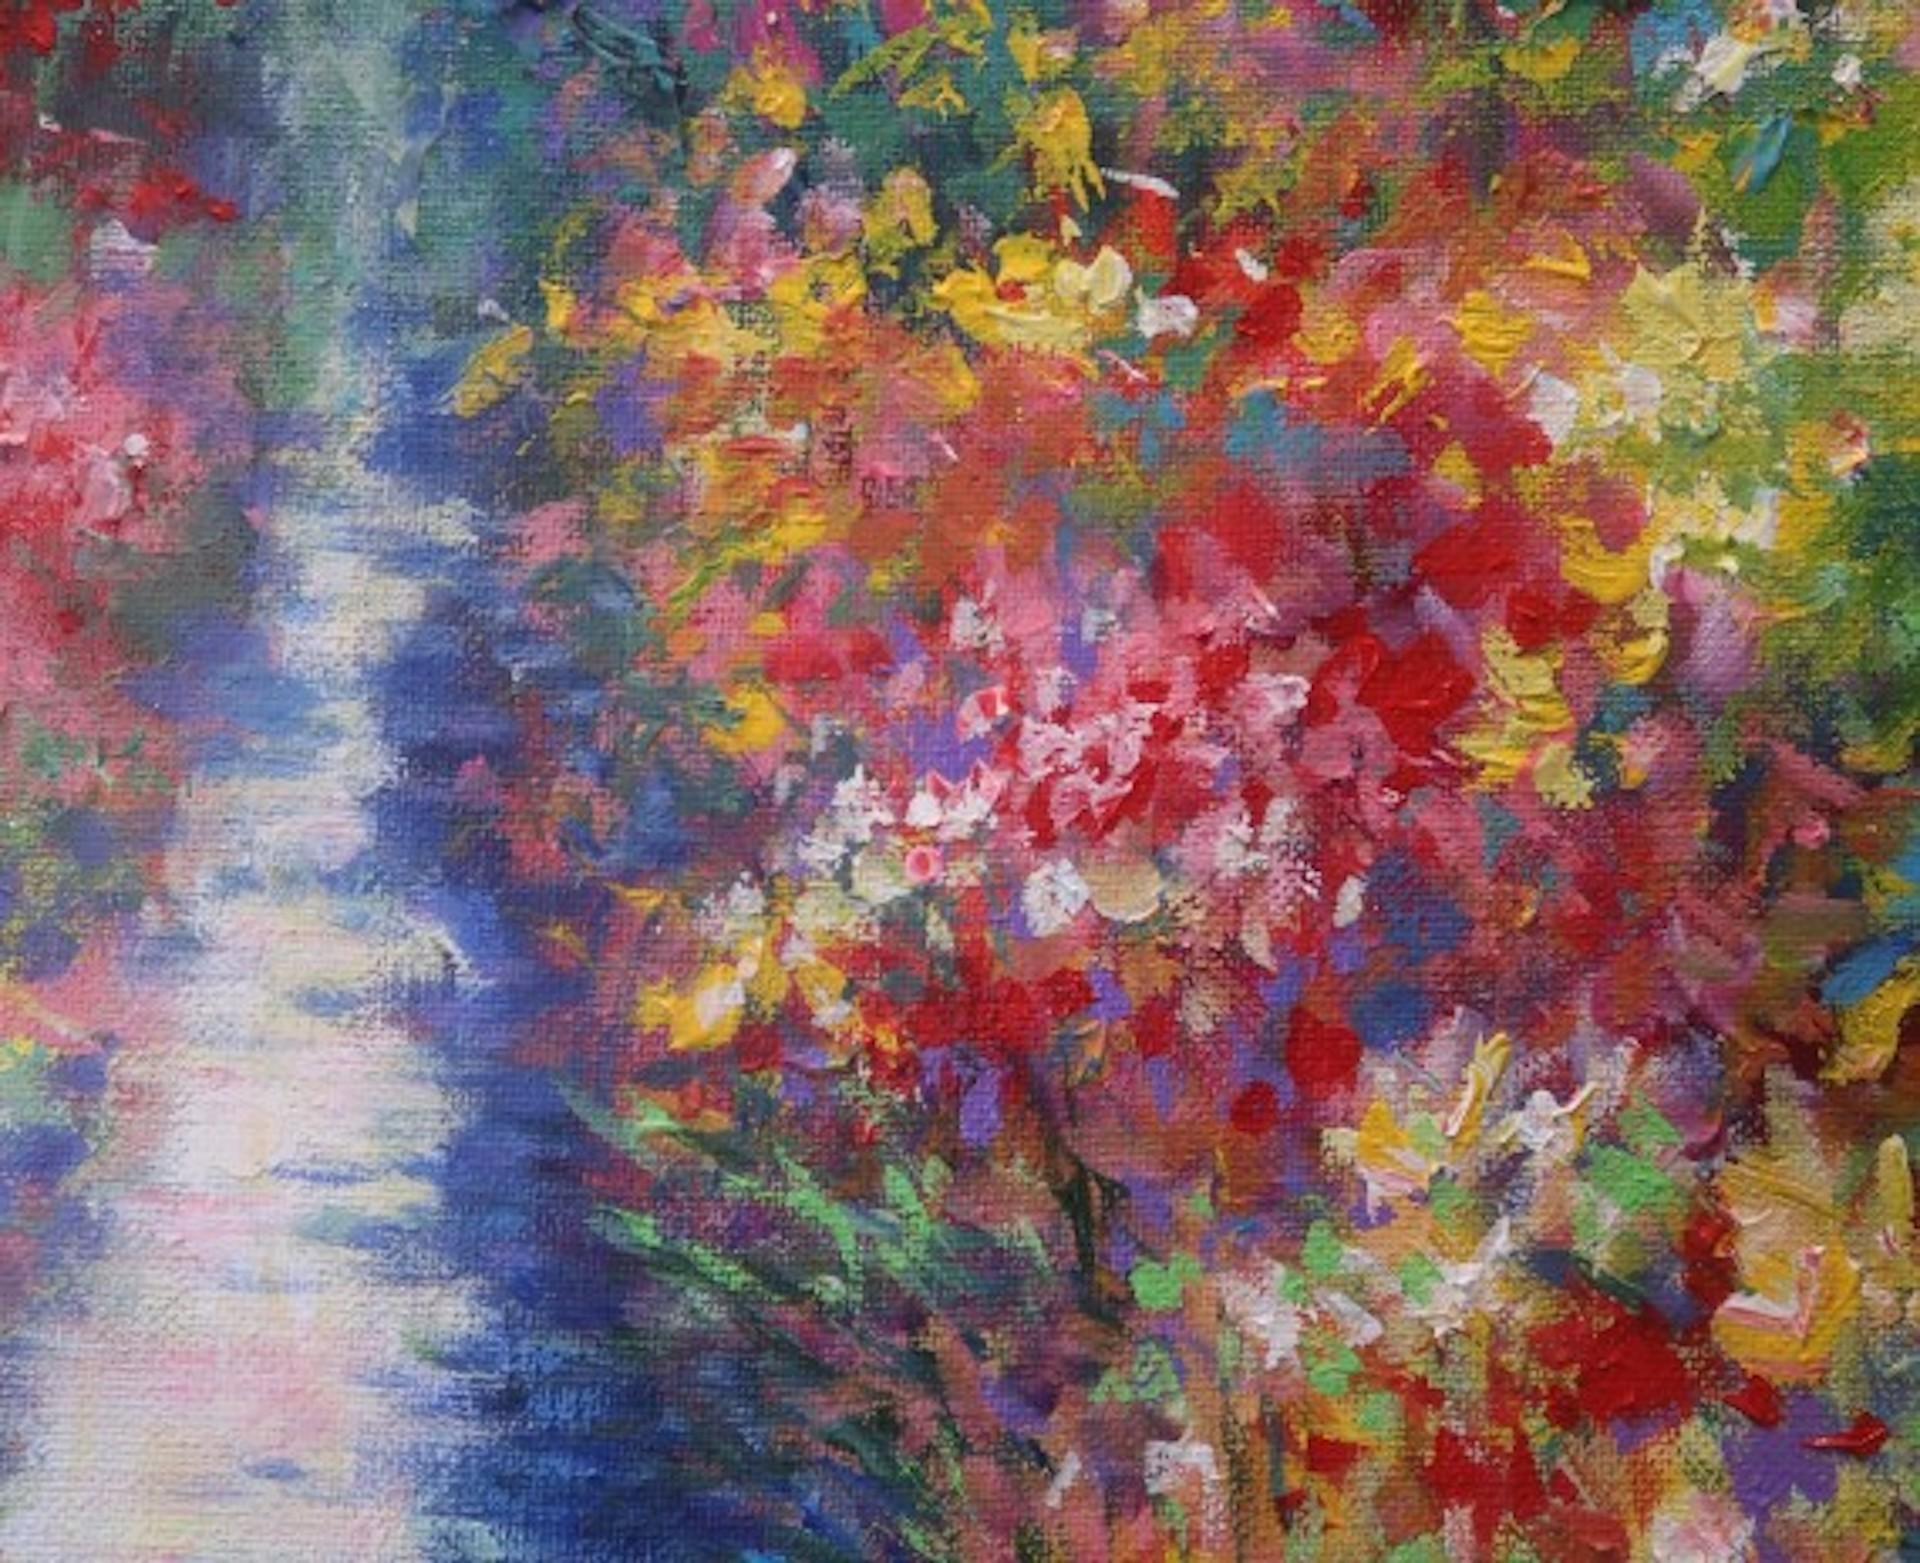 Mary Chaplin Rose Time at Monet’s garden [2021]
Please note that insitu images are purely an indication of how a piece may look

Mary Chaplin Rose Time at Monet's garden The garden of Claude Monet is one of Mary Chaplin’s favourite gardens that she